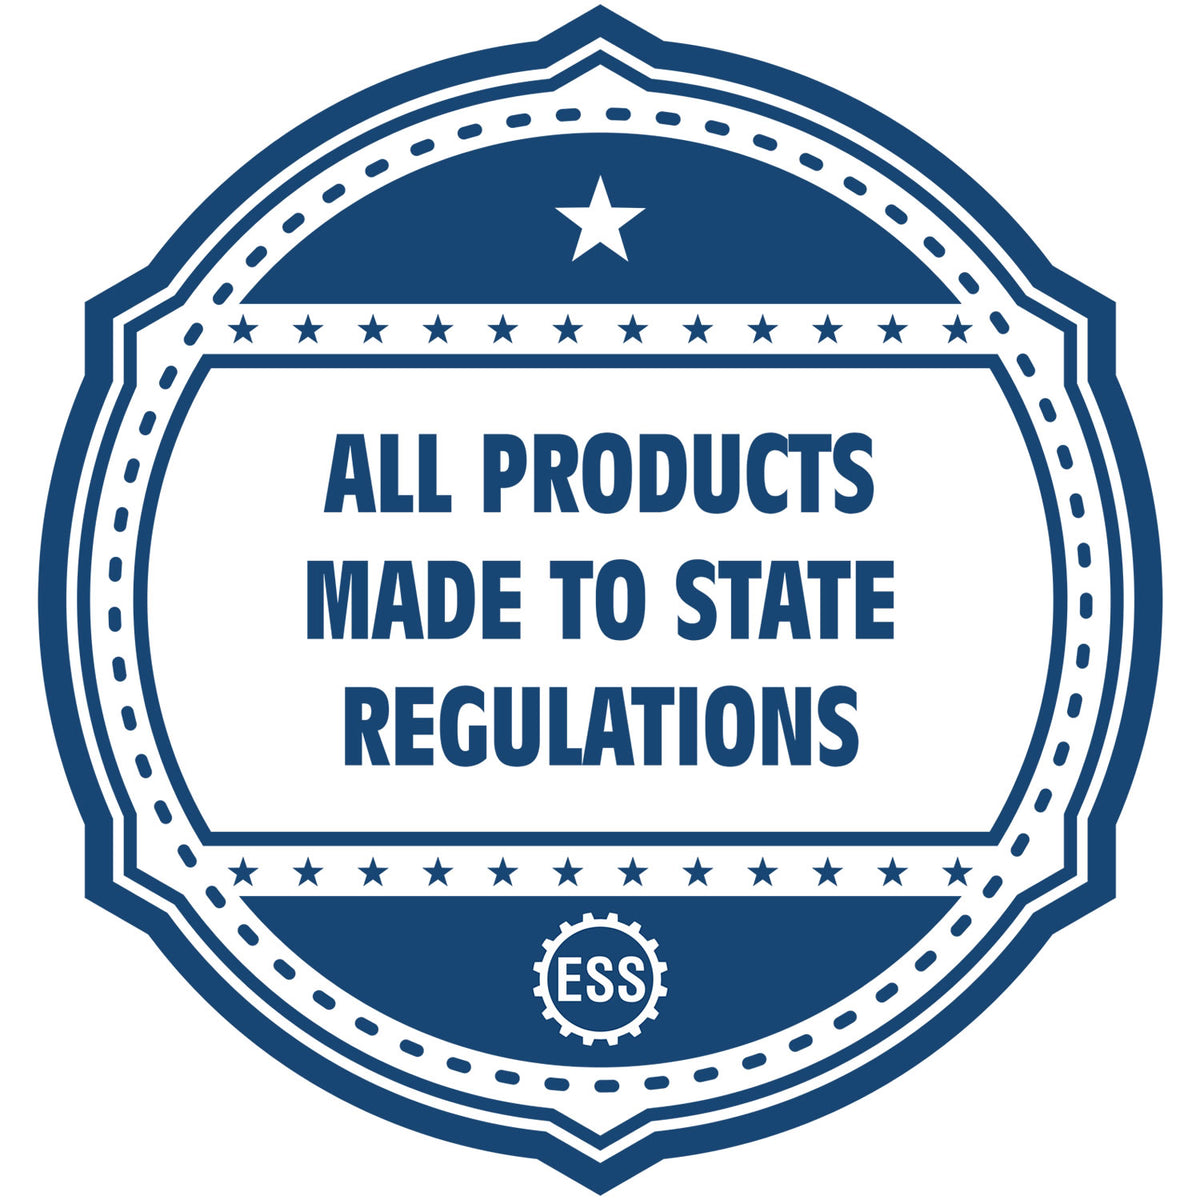 An icon or badge element for the Wooden Handle Nebraska State Seal Notary Public Stamp showing that this product is made in compliance with state regulations.